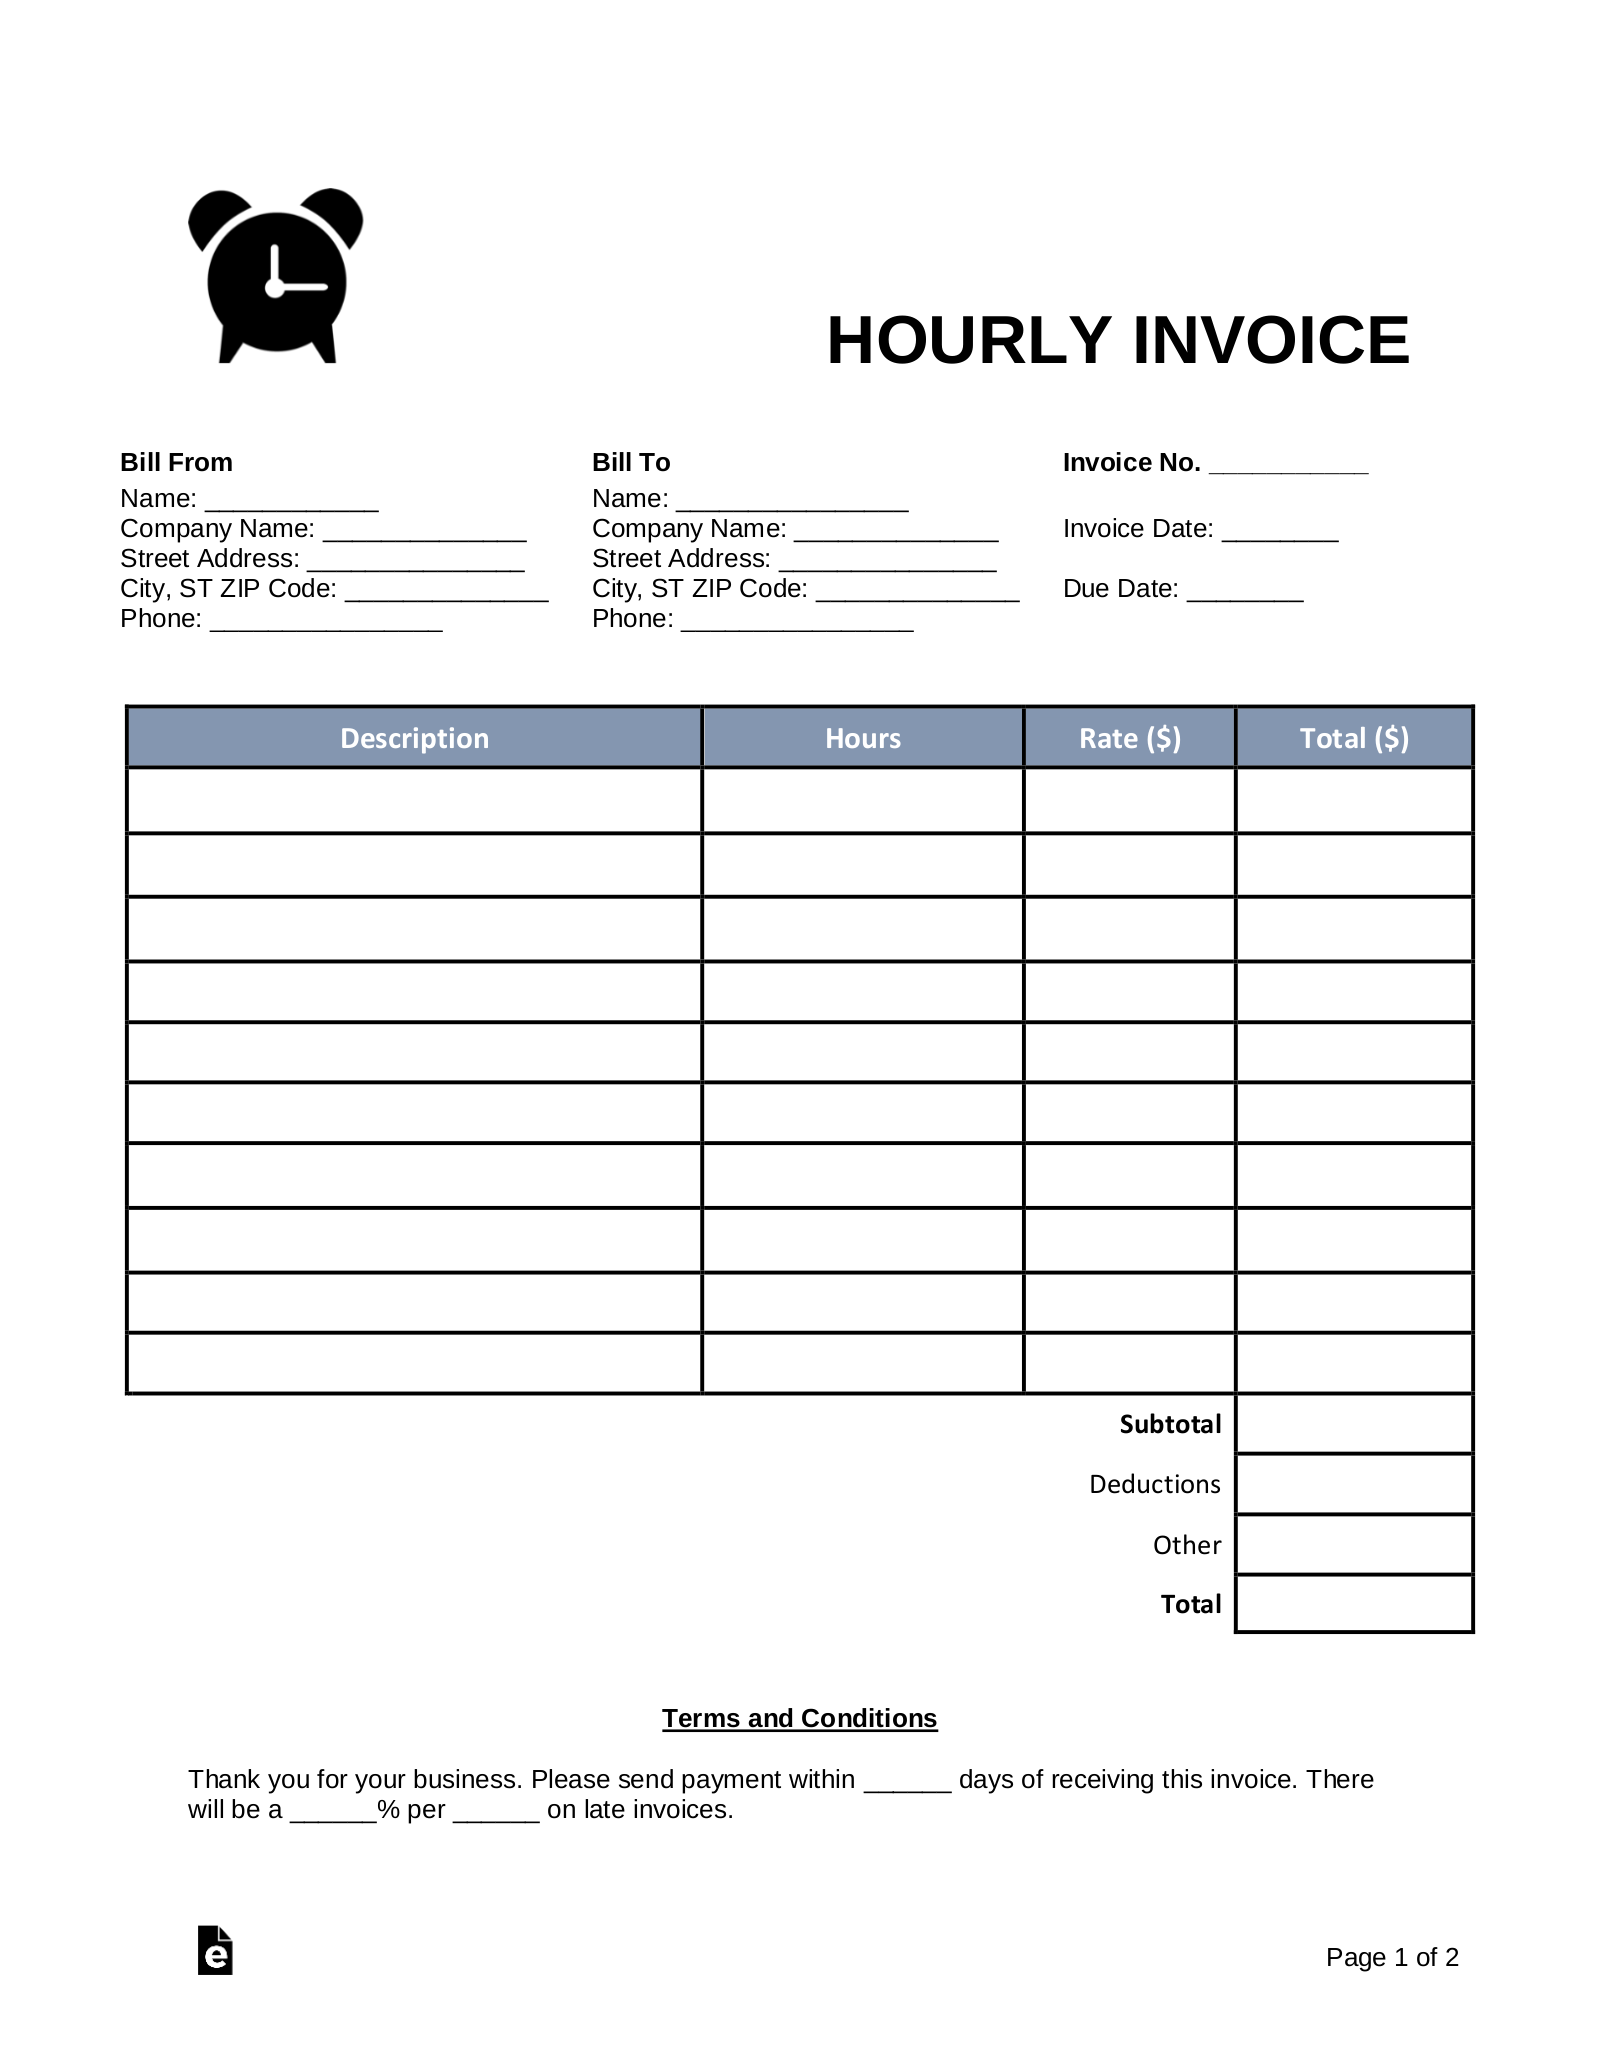 Free Hourly Invoice Template PDF Word EForms